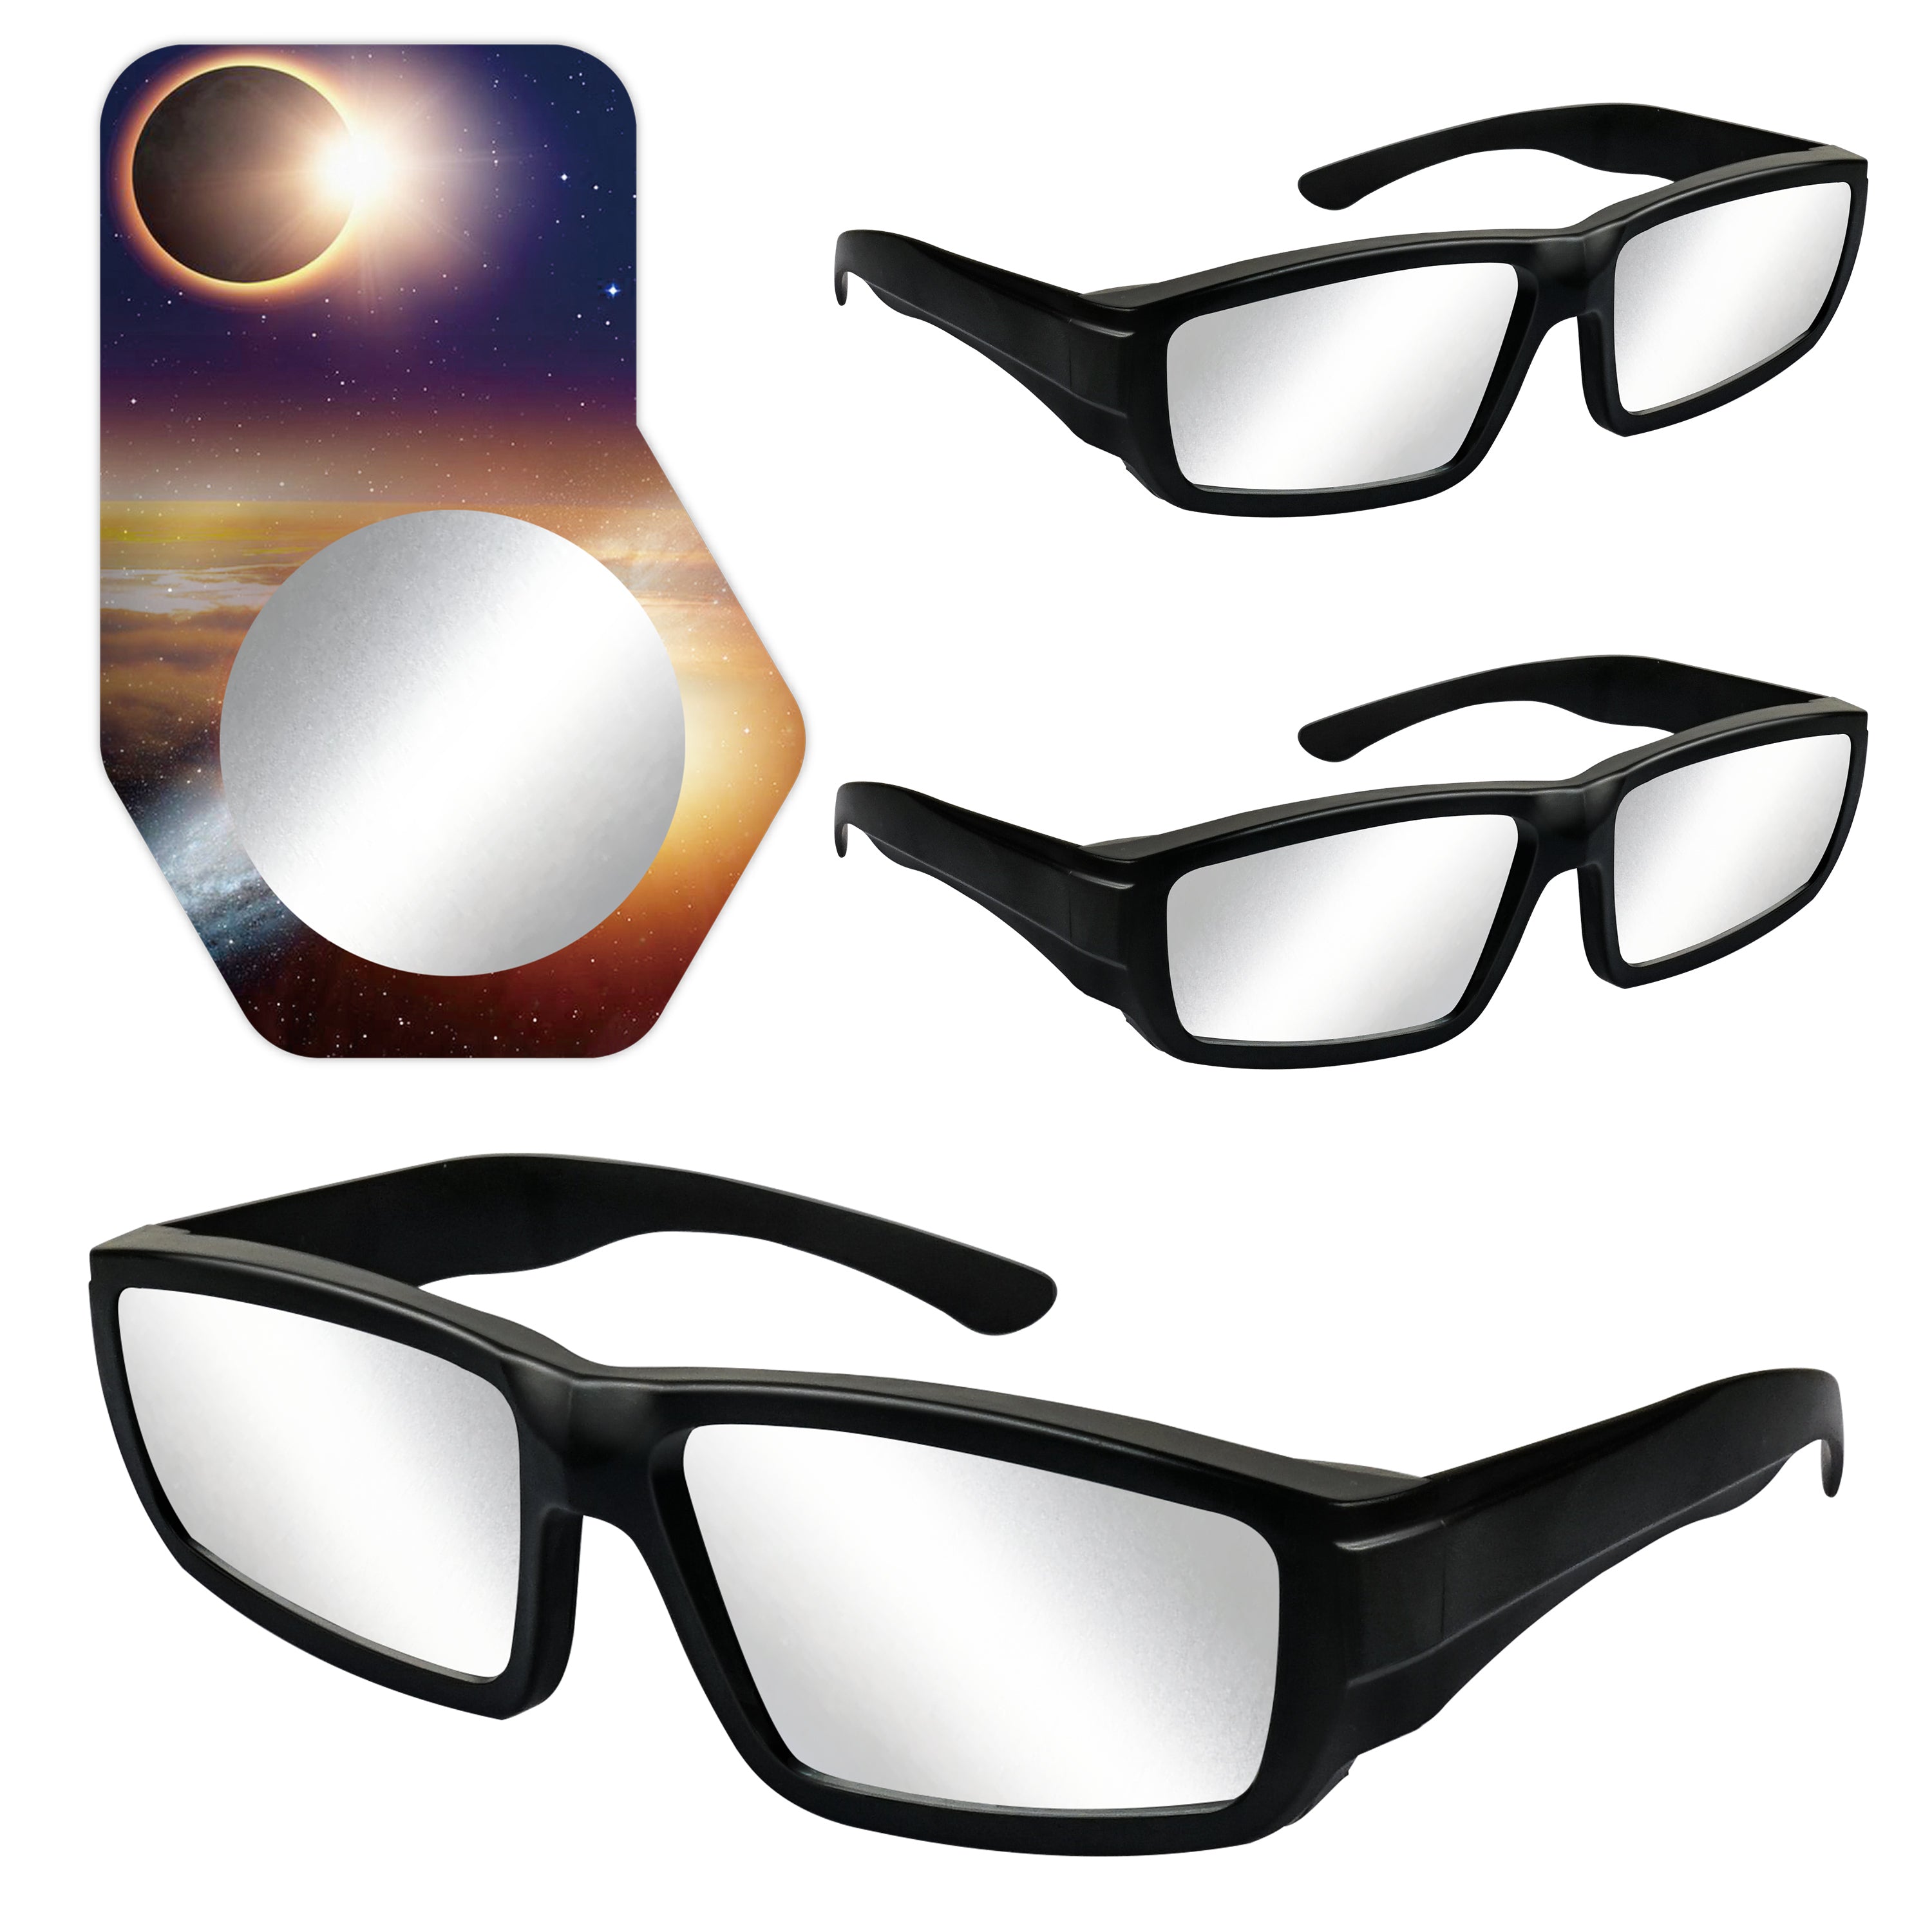 Solar Eclipse Glasses - ISO & CE Certified for Direct and Safe Viewing of the Sun, Suitable for Adults or Kids, Bonus Smartphone Photo Filter Lens